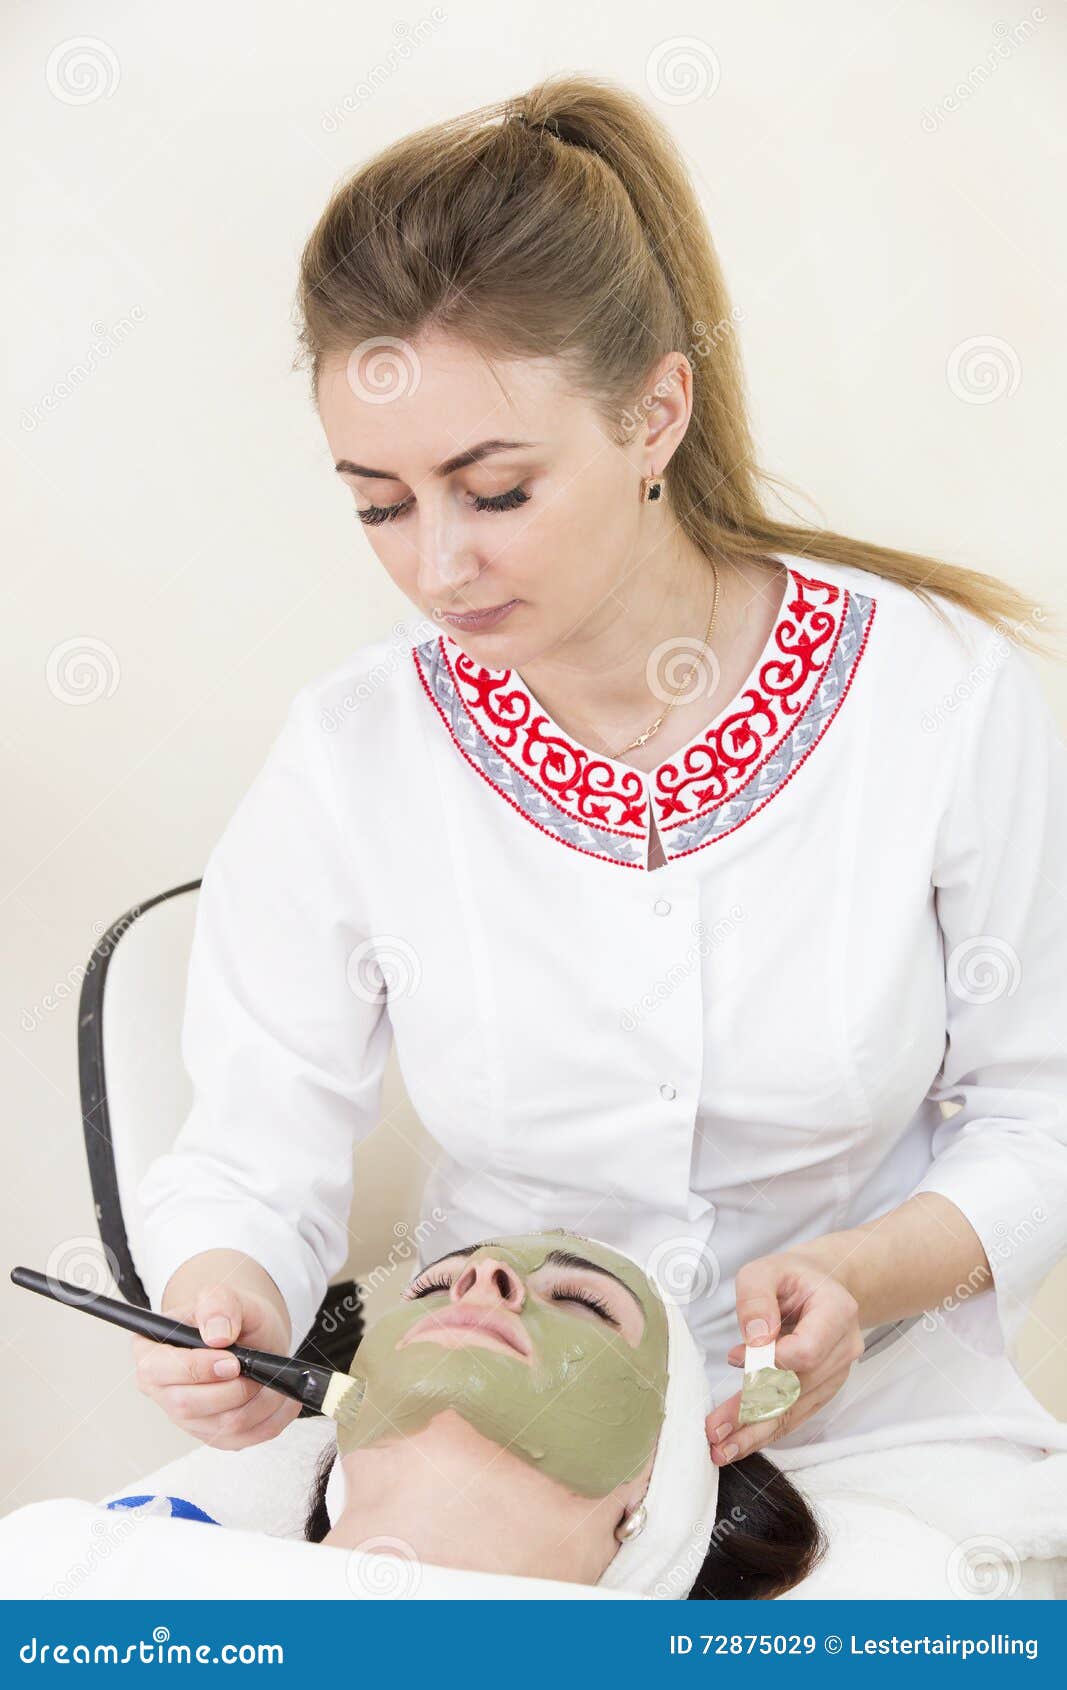 Process Of Massage And Facials Stock Image Image Of People Female 72875029